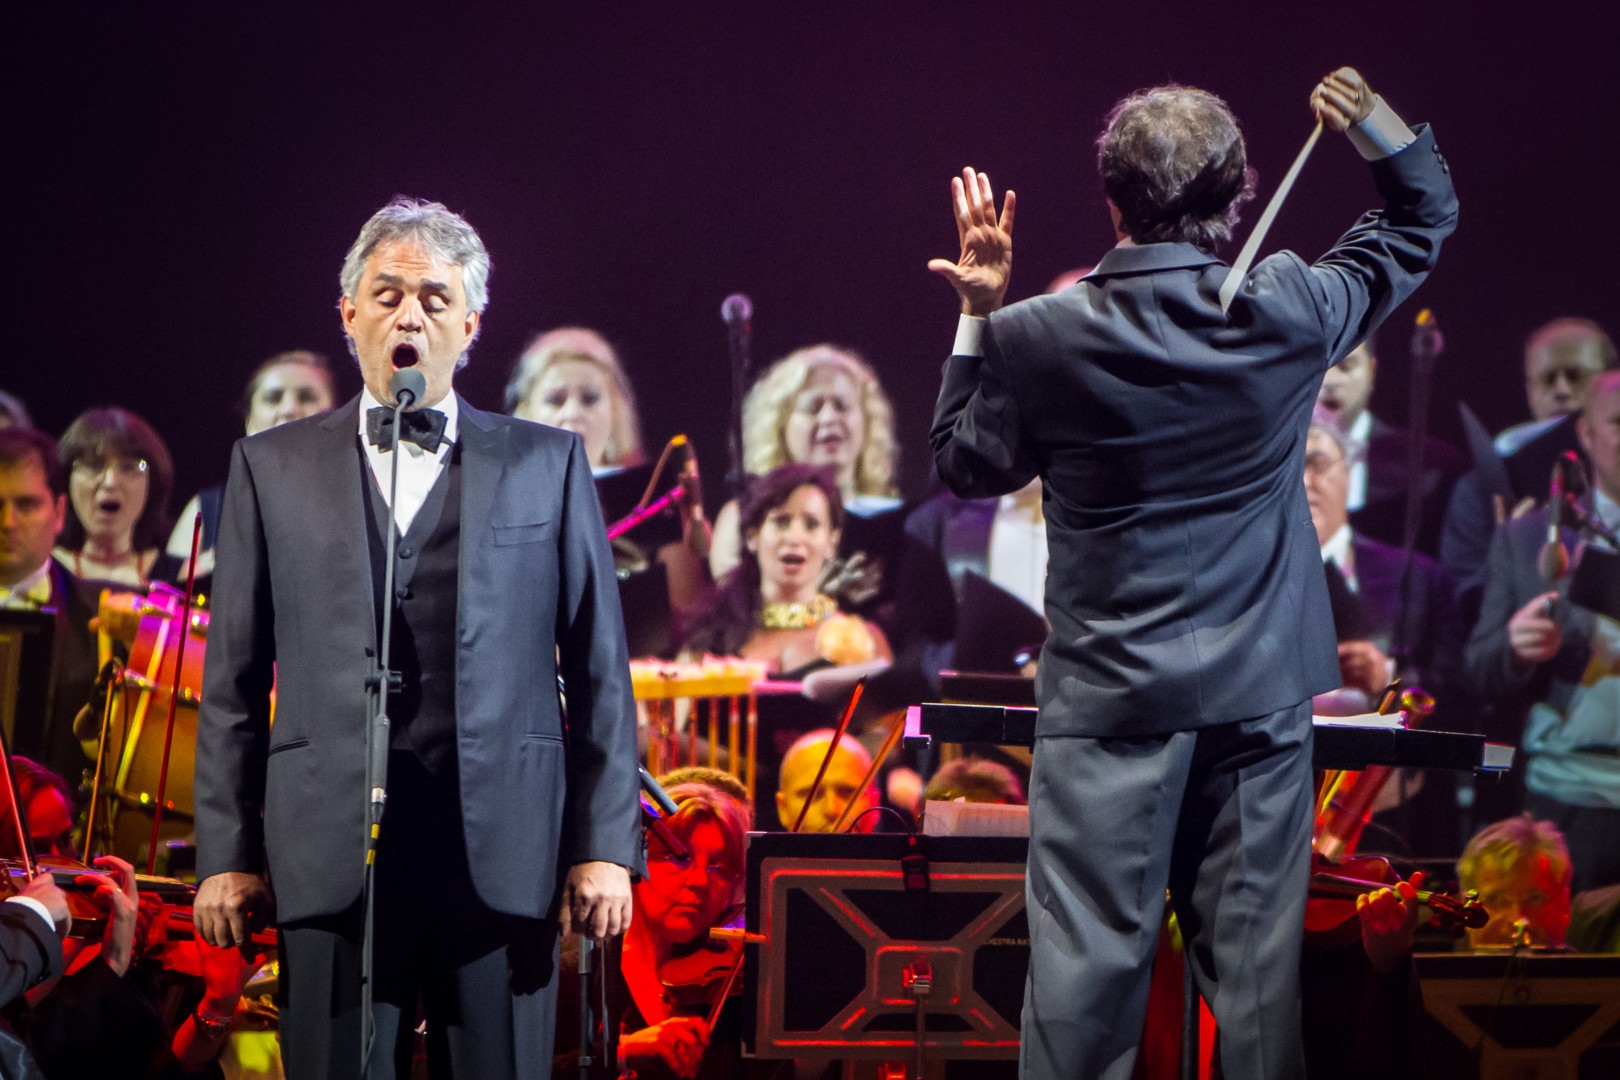 Andrea Bocelli at Romexpo in Bucharest on May 25, 2013 (28974c0029)